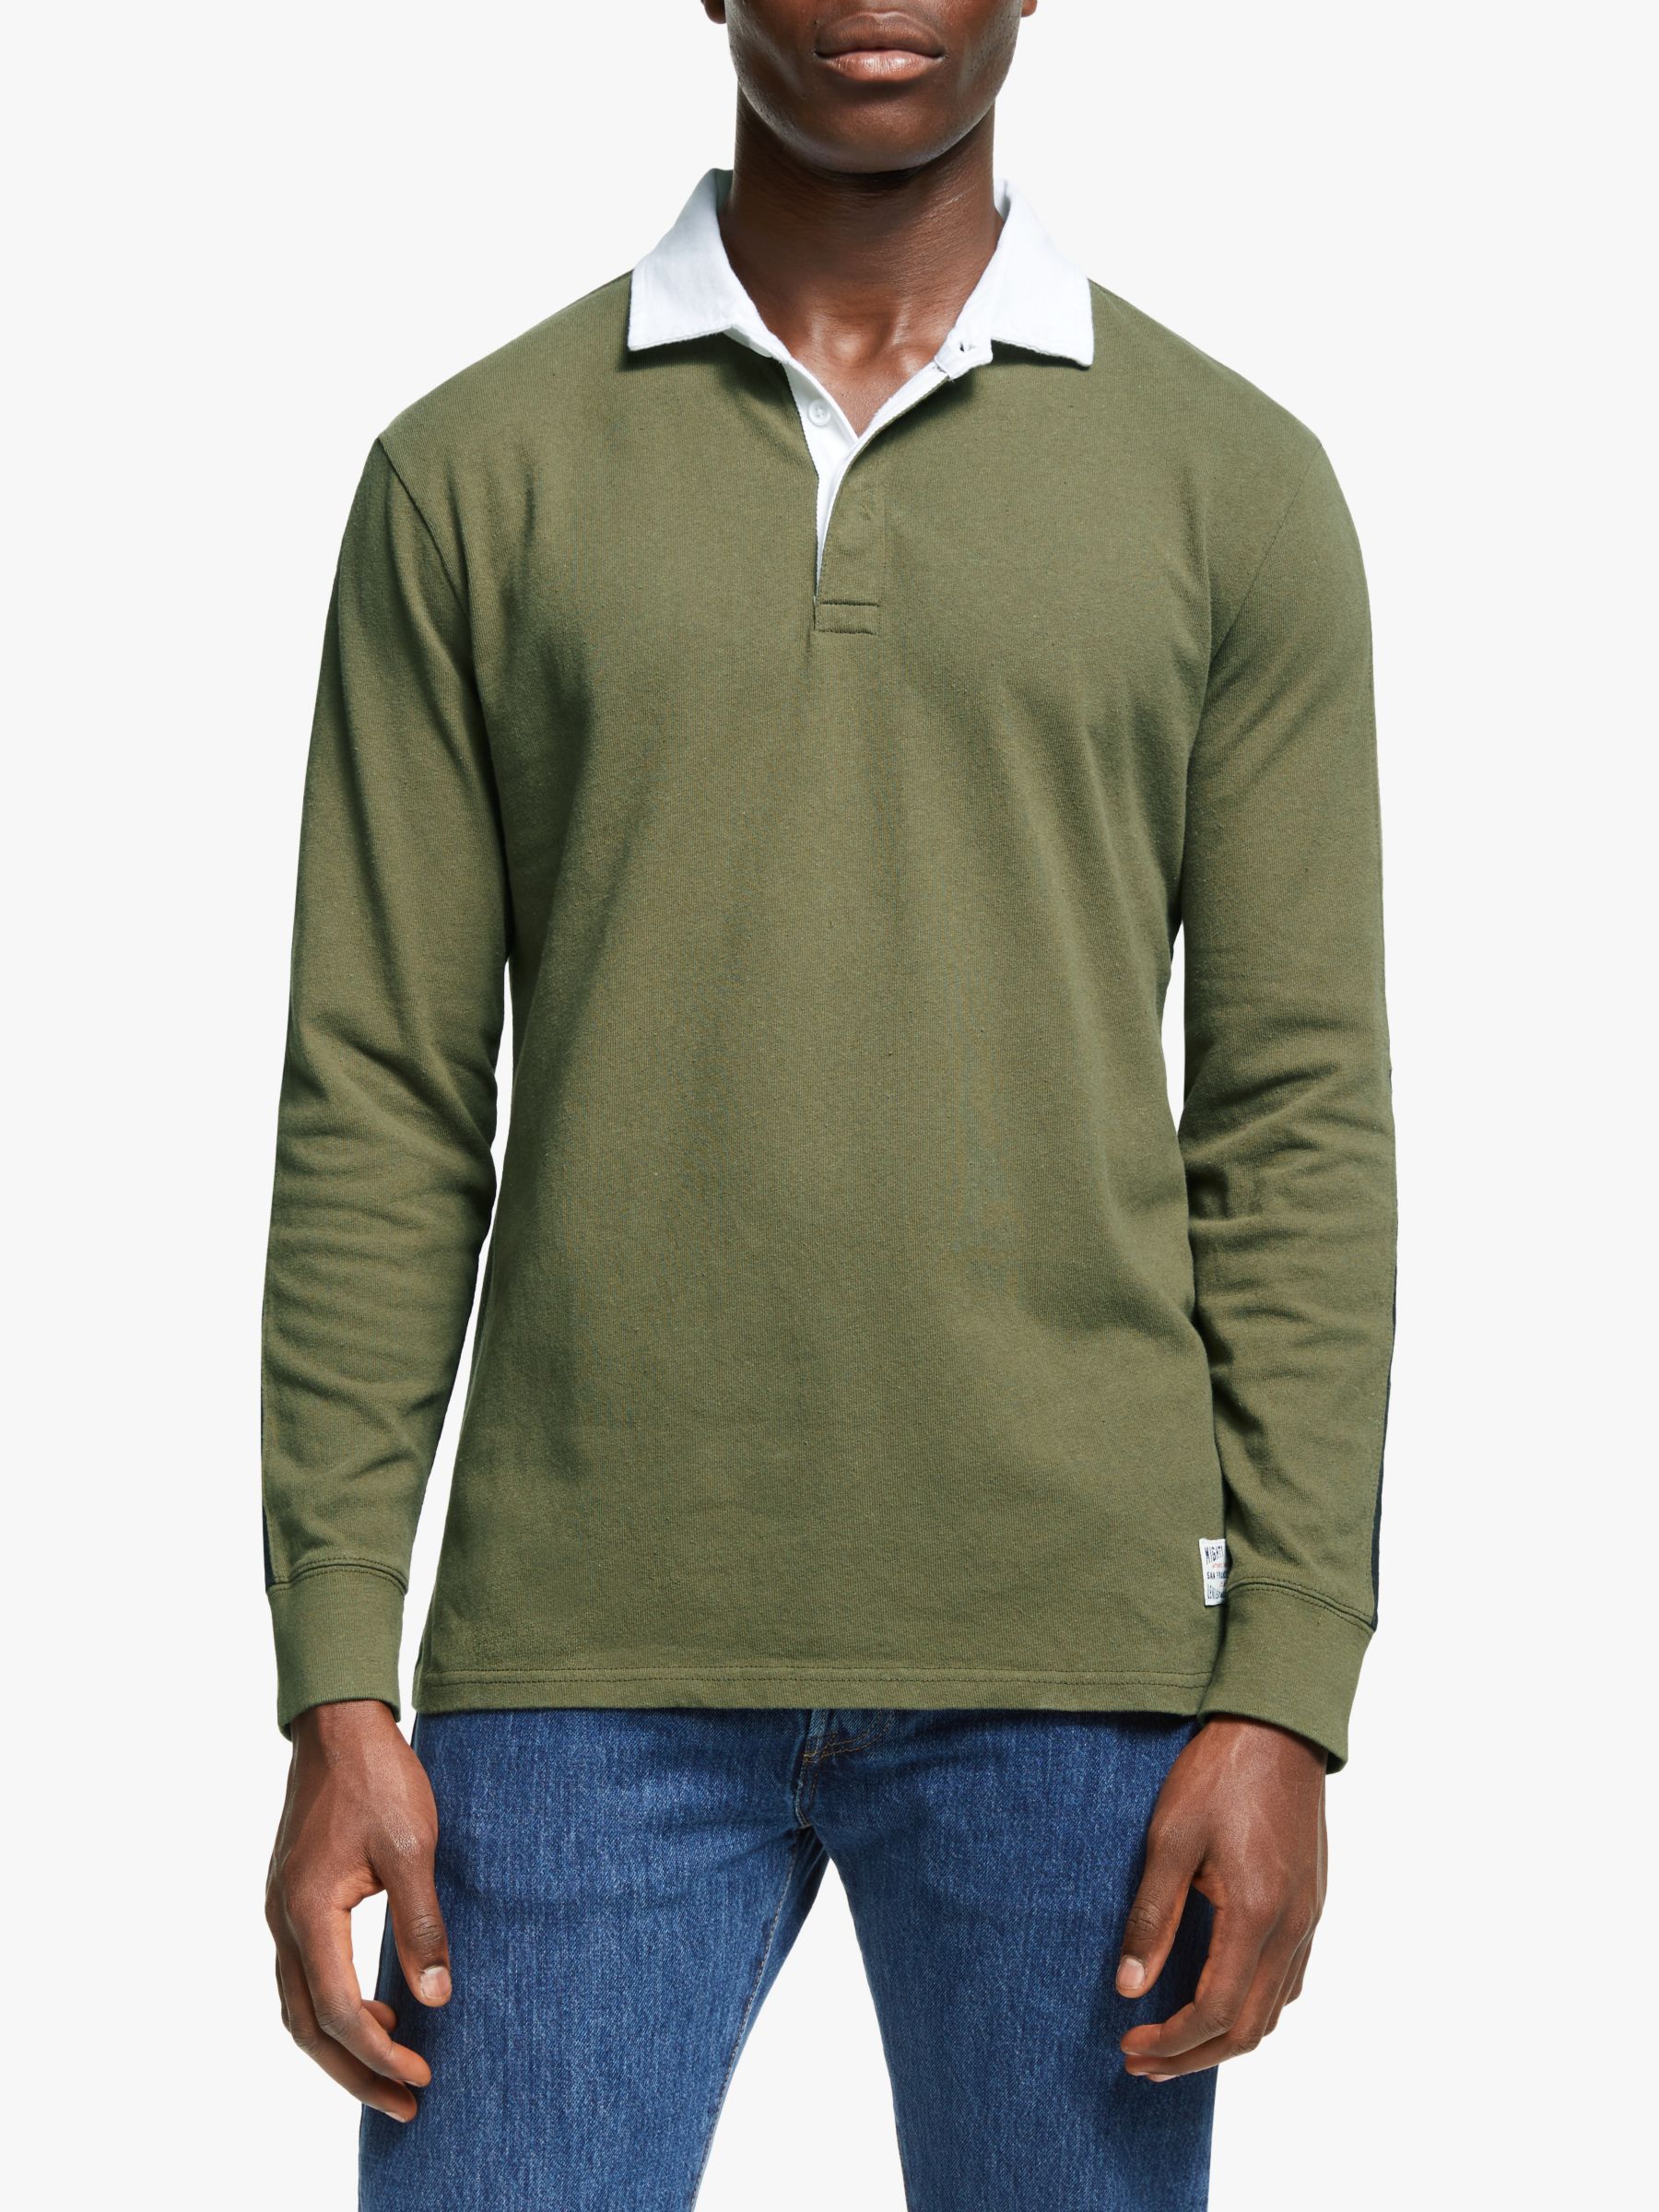 Men's Polo Shirts & Rugby Shirts | John Lewis & Partners